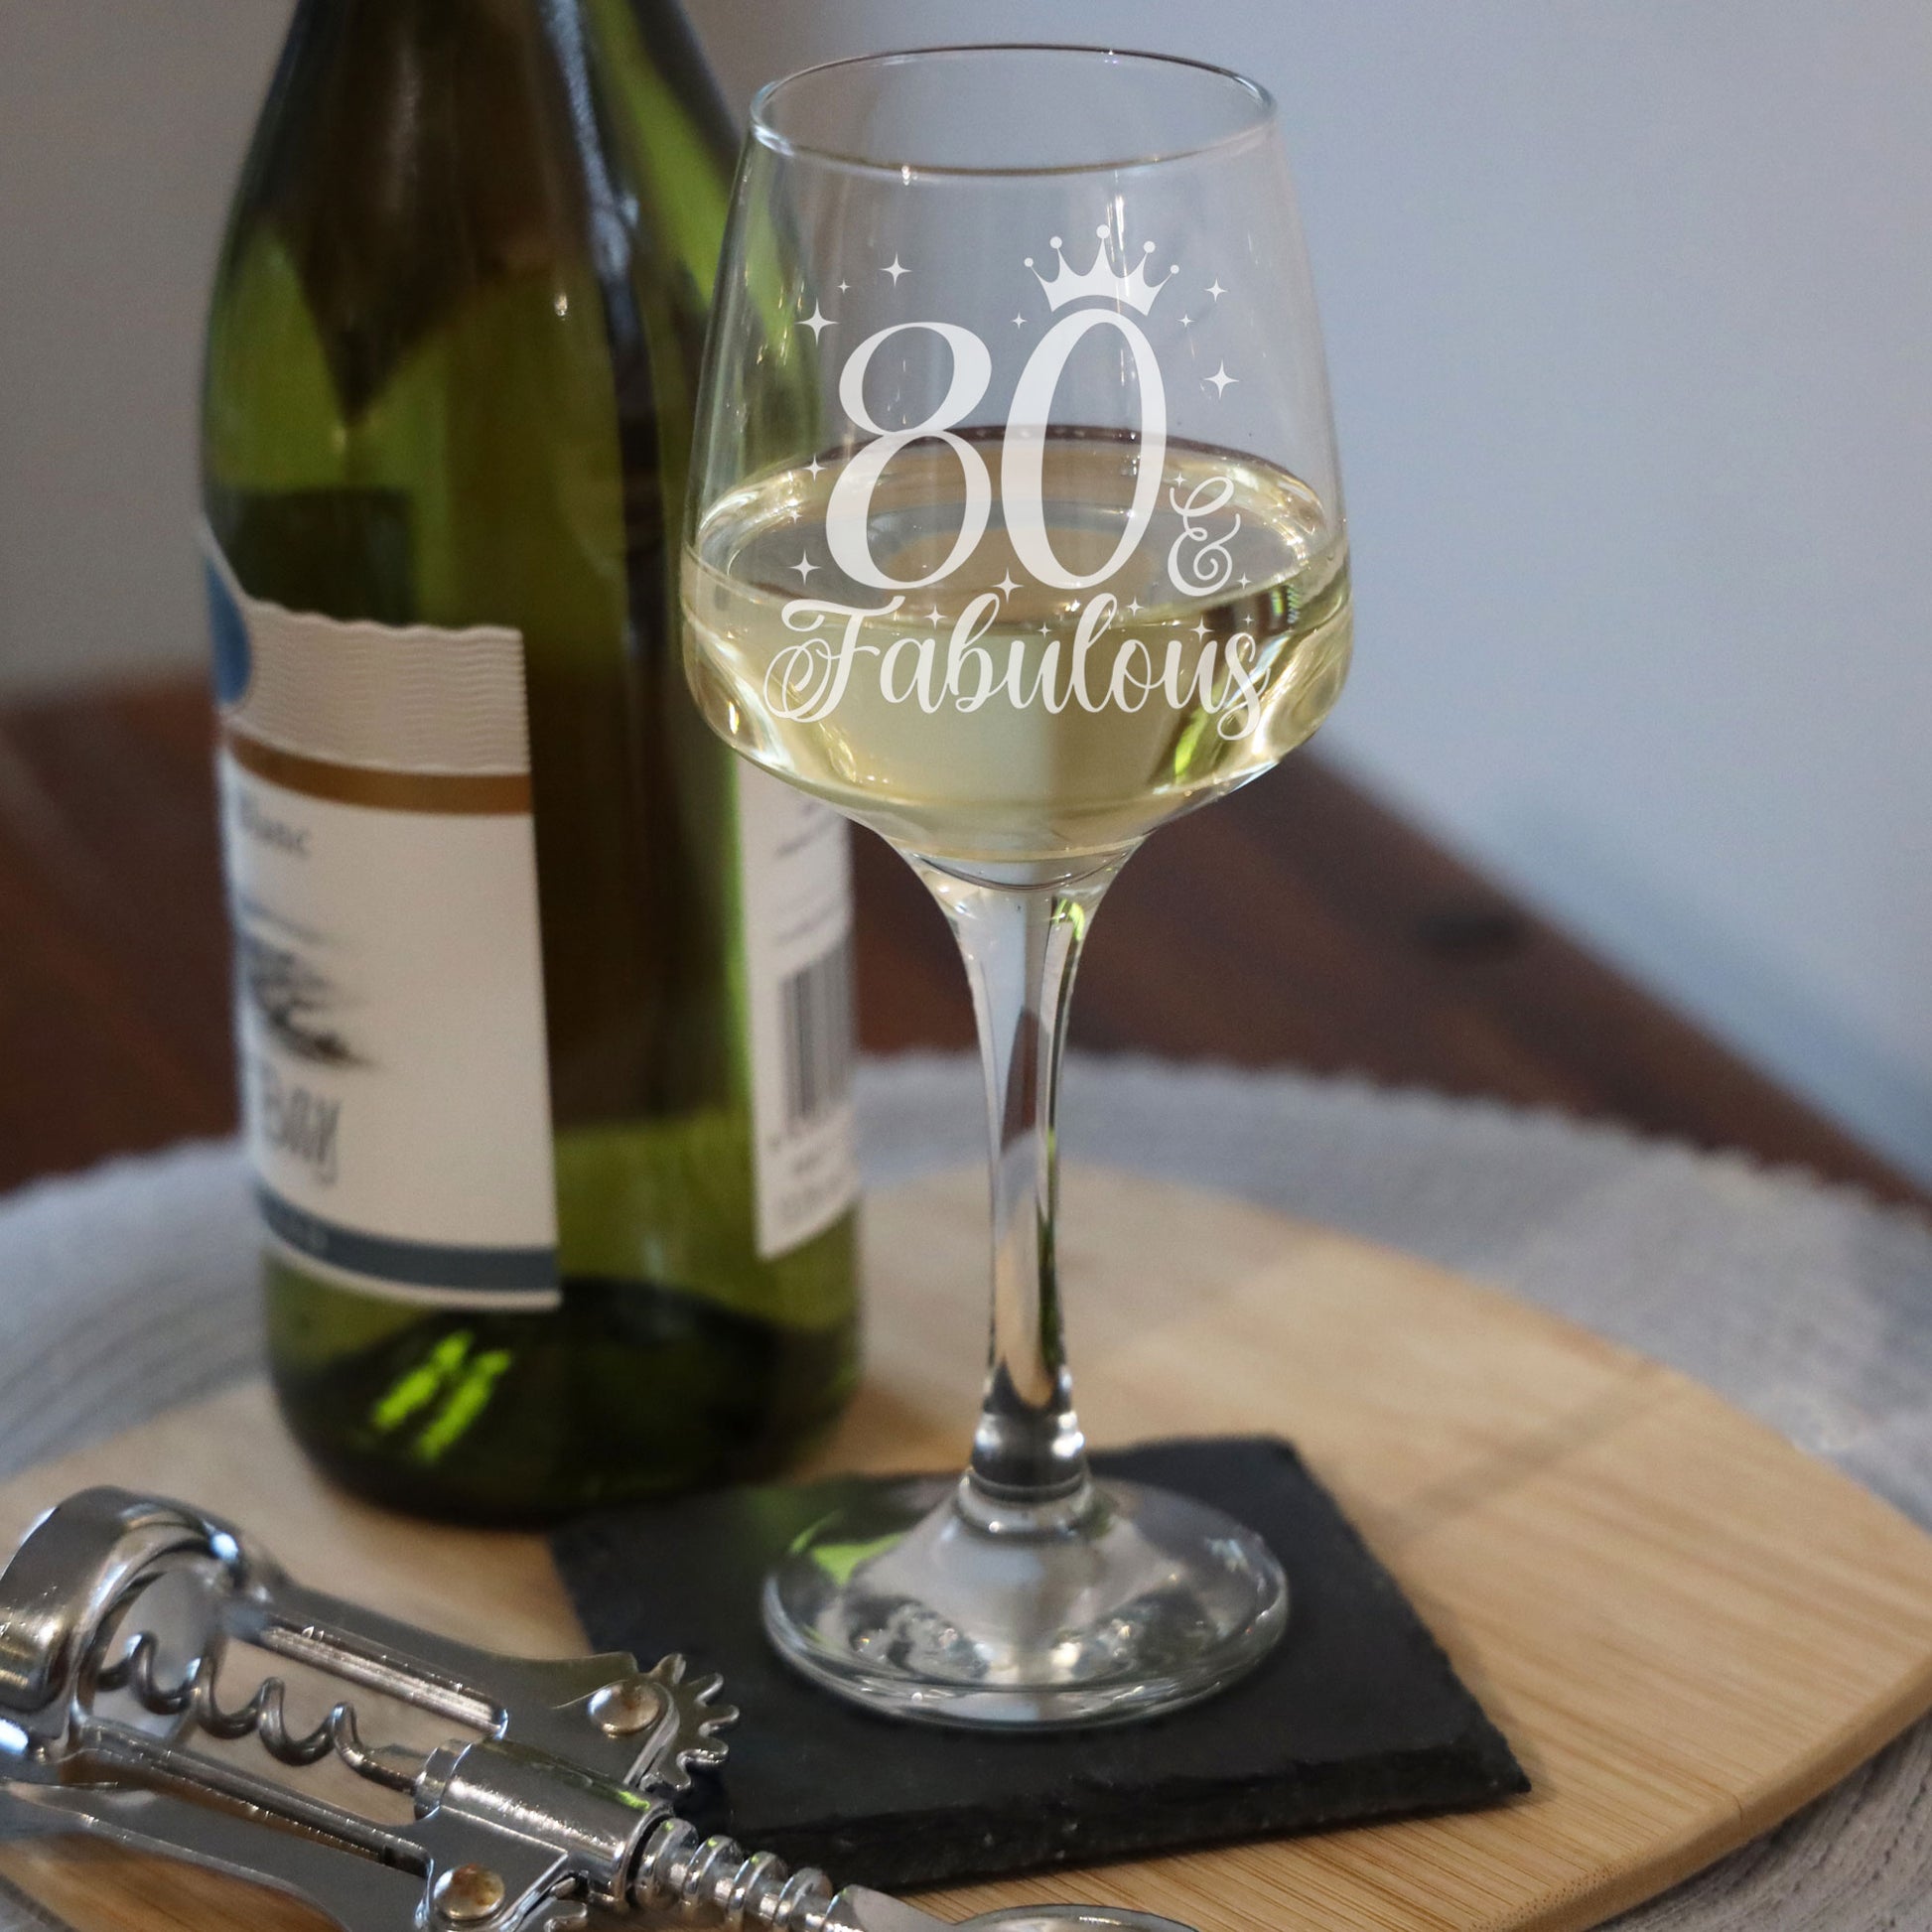 80 & Fabulous 80th Birthday Gift Engraved Wine Glass and/or Coaster Set  - Always Looking Good -   